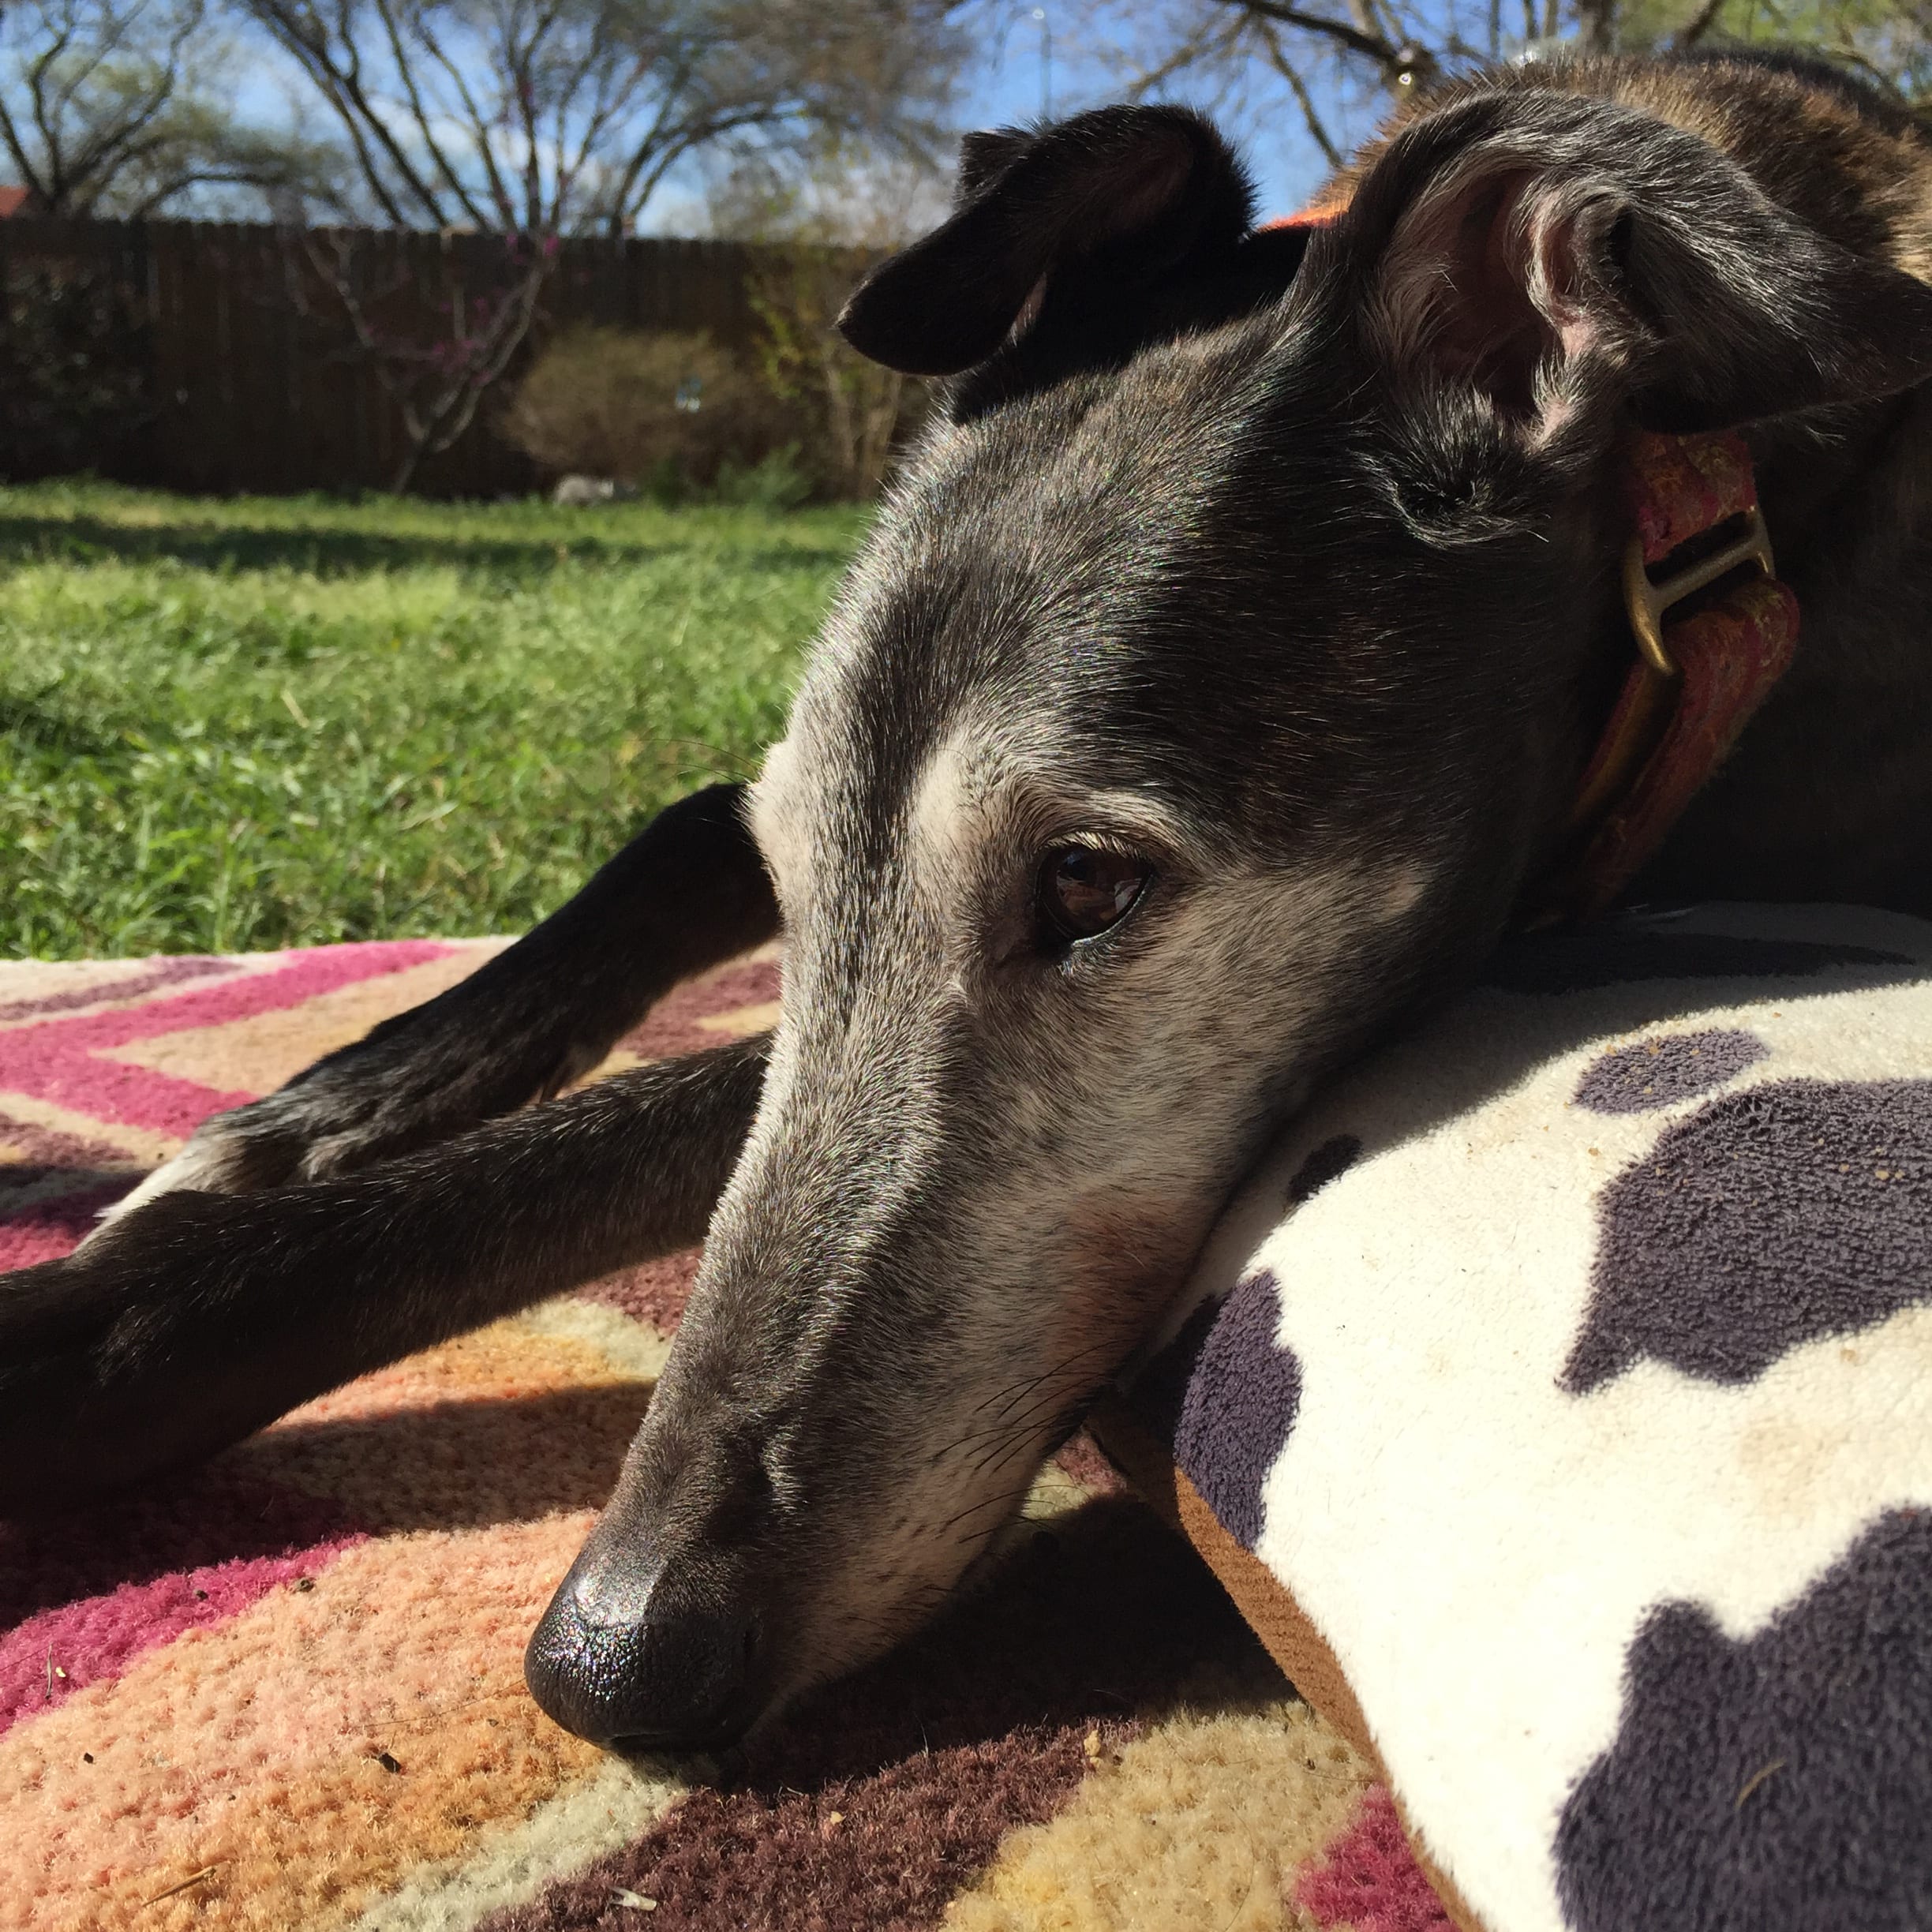 Ms. Siggie is full of personality! She loves other dogs, cats and snuggling with her foster mom. She would love to be adopted by a family with another Greyhound!